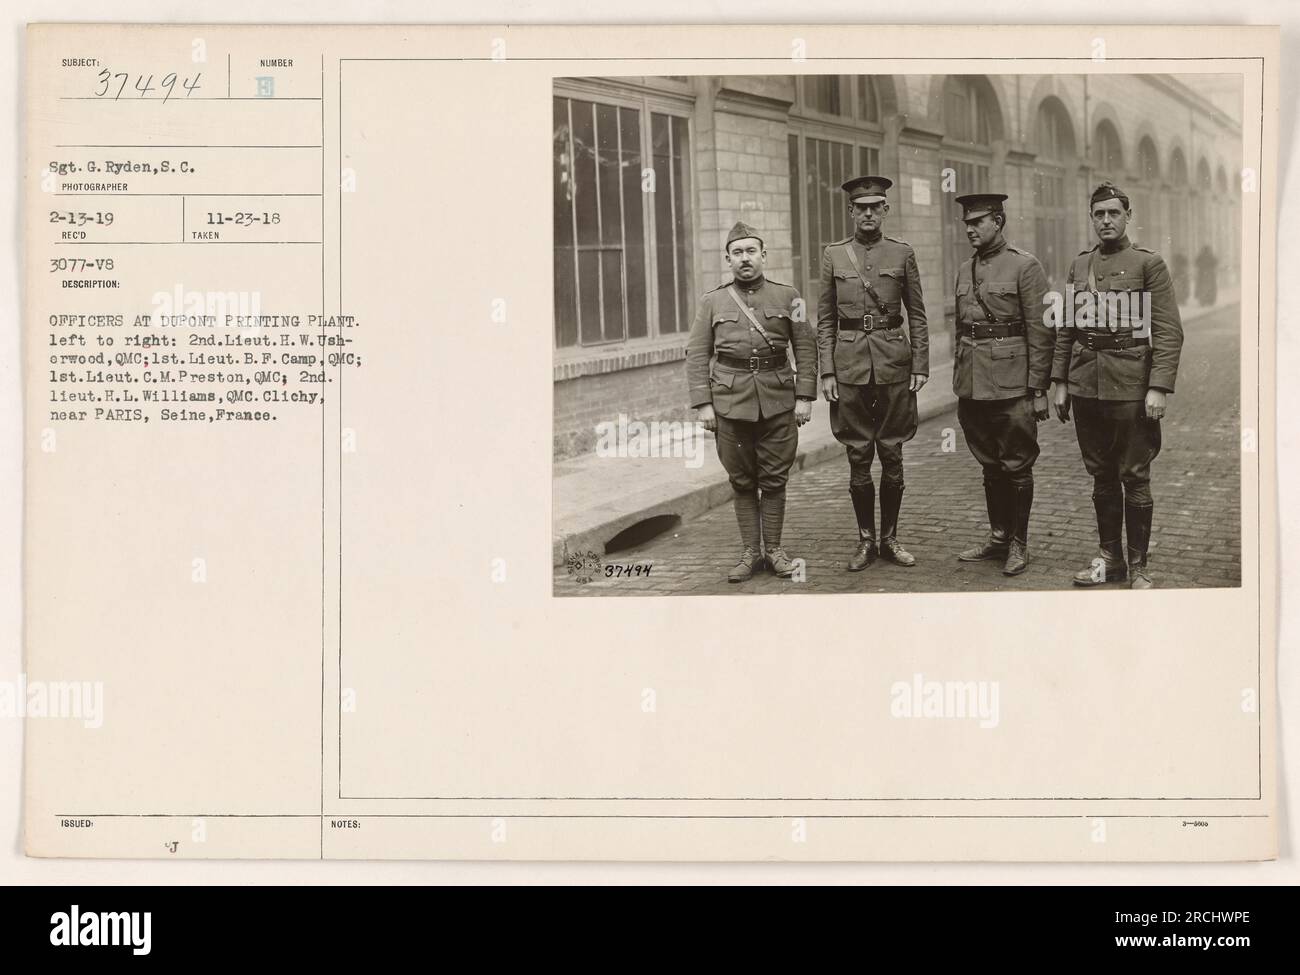 Sgt. G. Ryden from the Signal Corps took this photograph on February 13, 1919. It shows officers at the Dupont Printing Plant in Clichy, near Paris, France. From left to right, the officers are identified as 2nd Lt. H. W. Ushorwood, QMC; 1st Lt. B. F. Camp, MC; 1st Lt. C. M. Preston, QMC; and 2nd Lt. H. L. Williams, QMC. Stock Photo